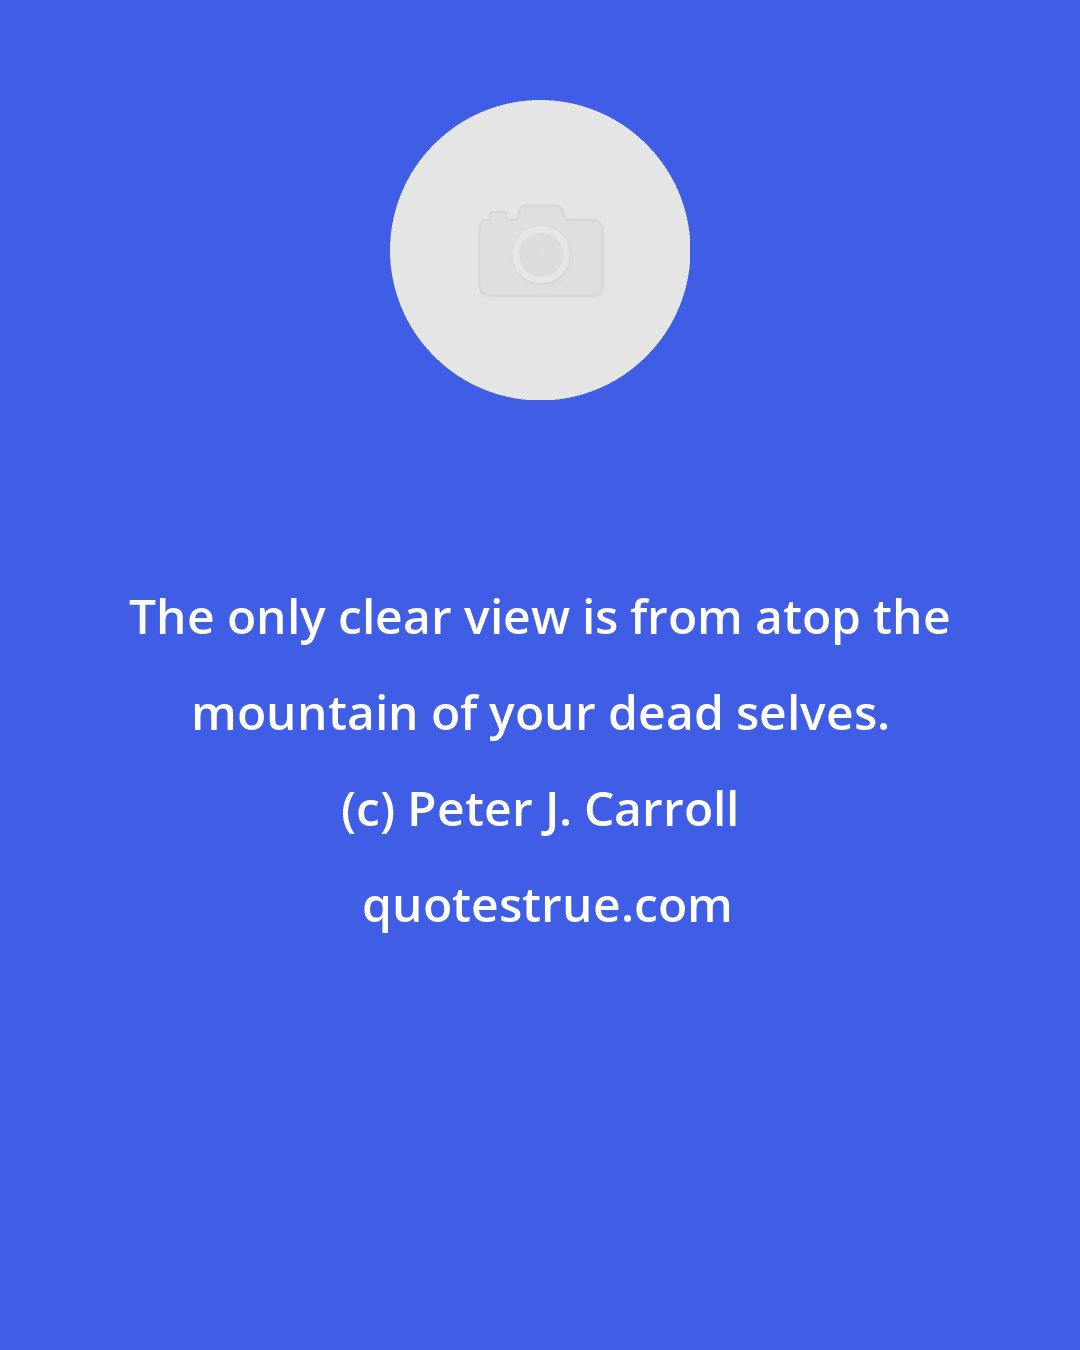 Peter J. Carroll: The only clear view is from atop the mountain of your dead selves.